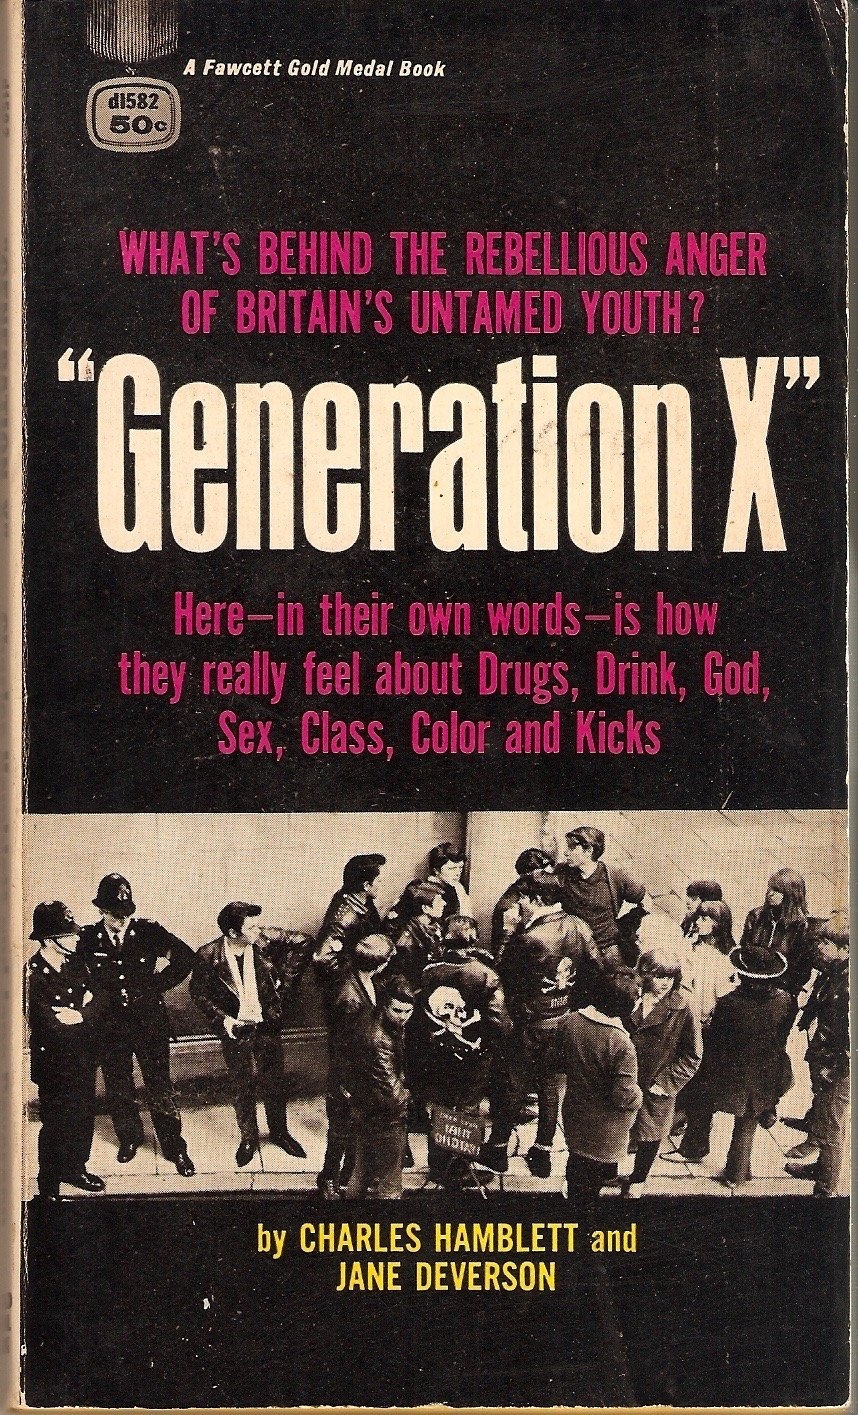 Cover of the book 'Generation X' featuring a photograph of several young men dressed in heavily-adorned leather motorcycle jackets.